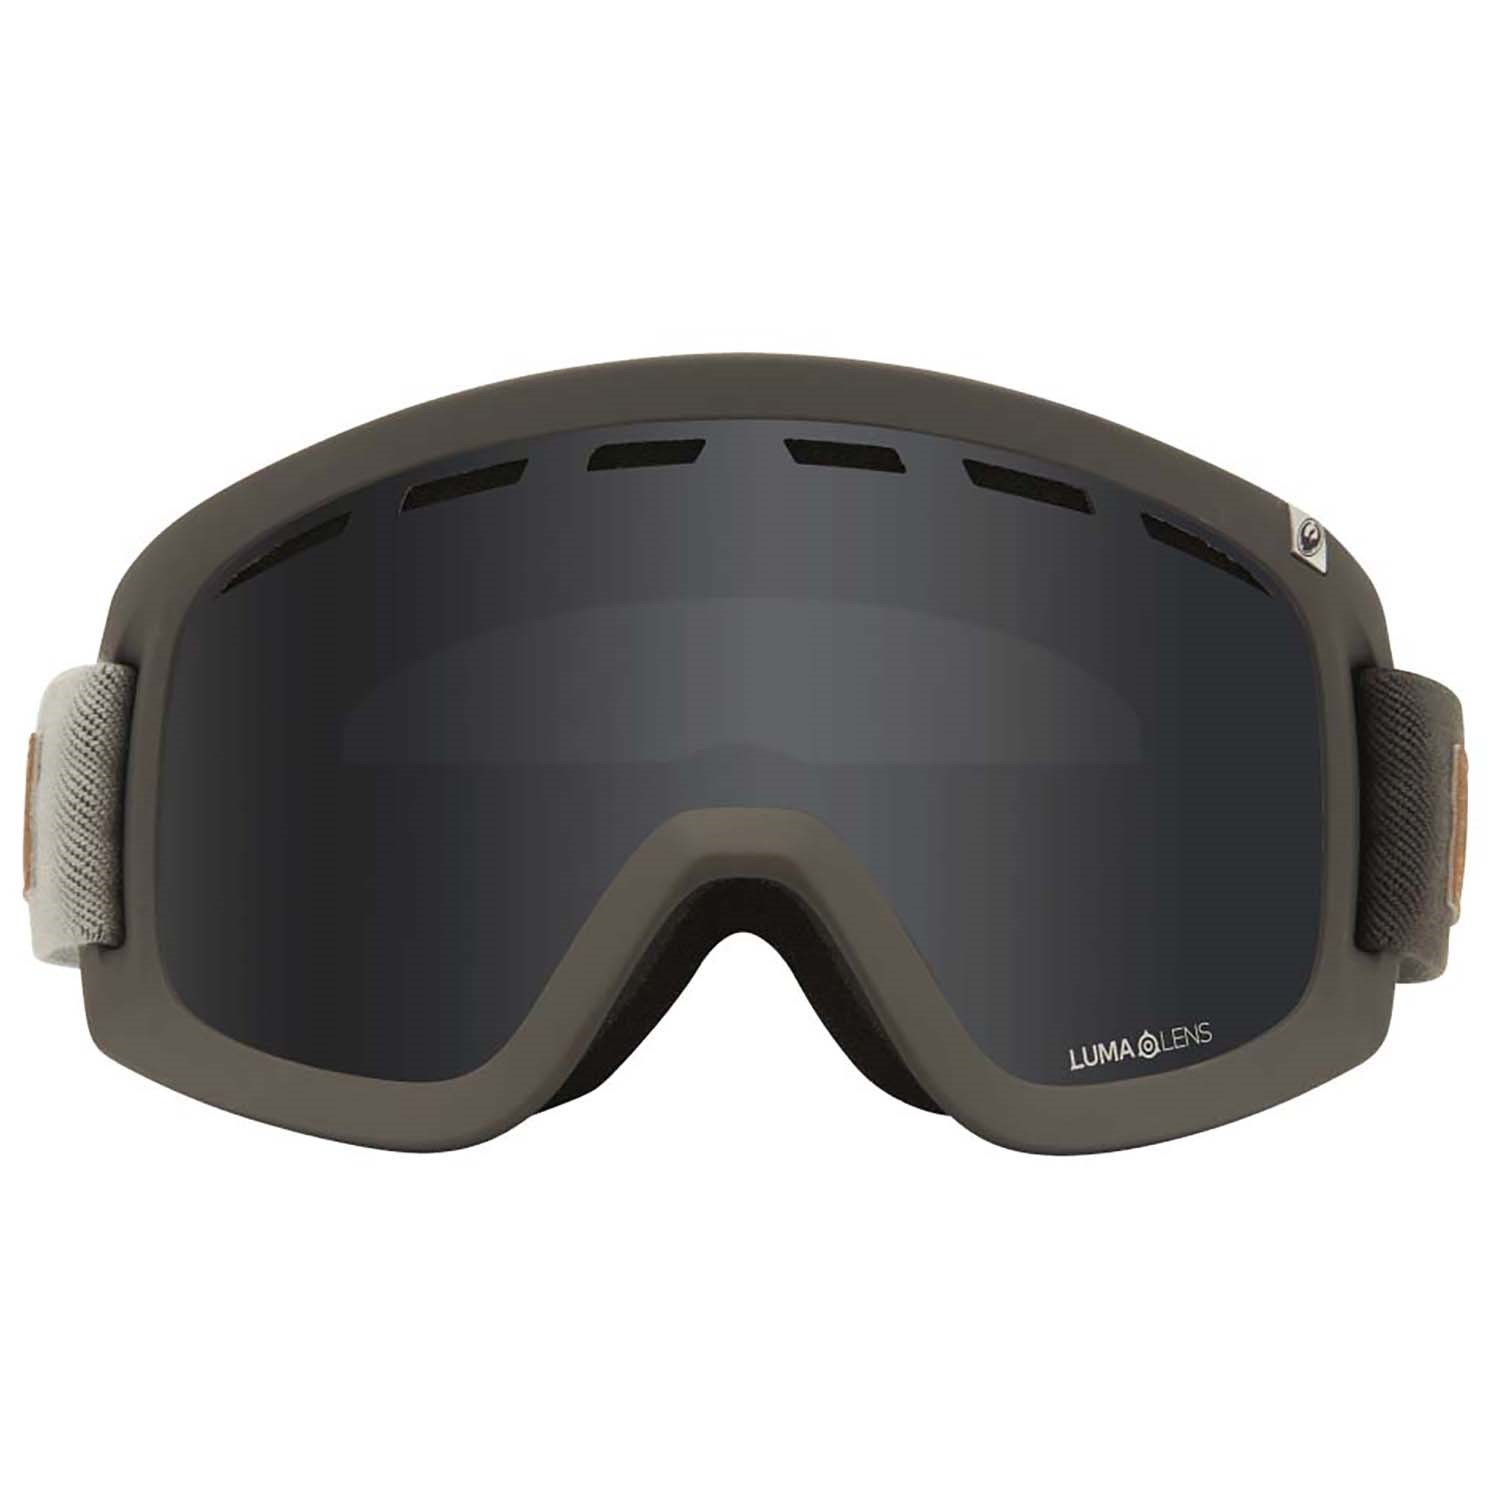 2015 Dragon D1 Snow Goggles Murdered out Black With Dark Smoke Lens for sale online 